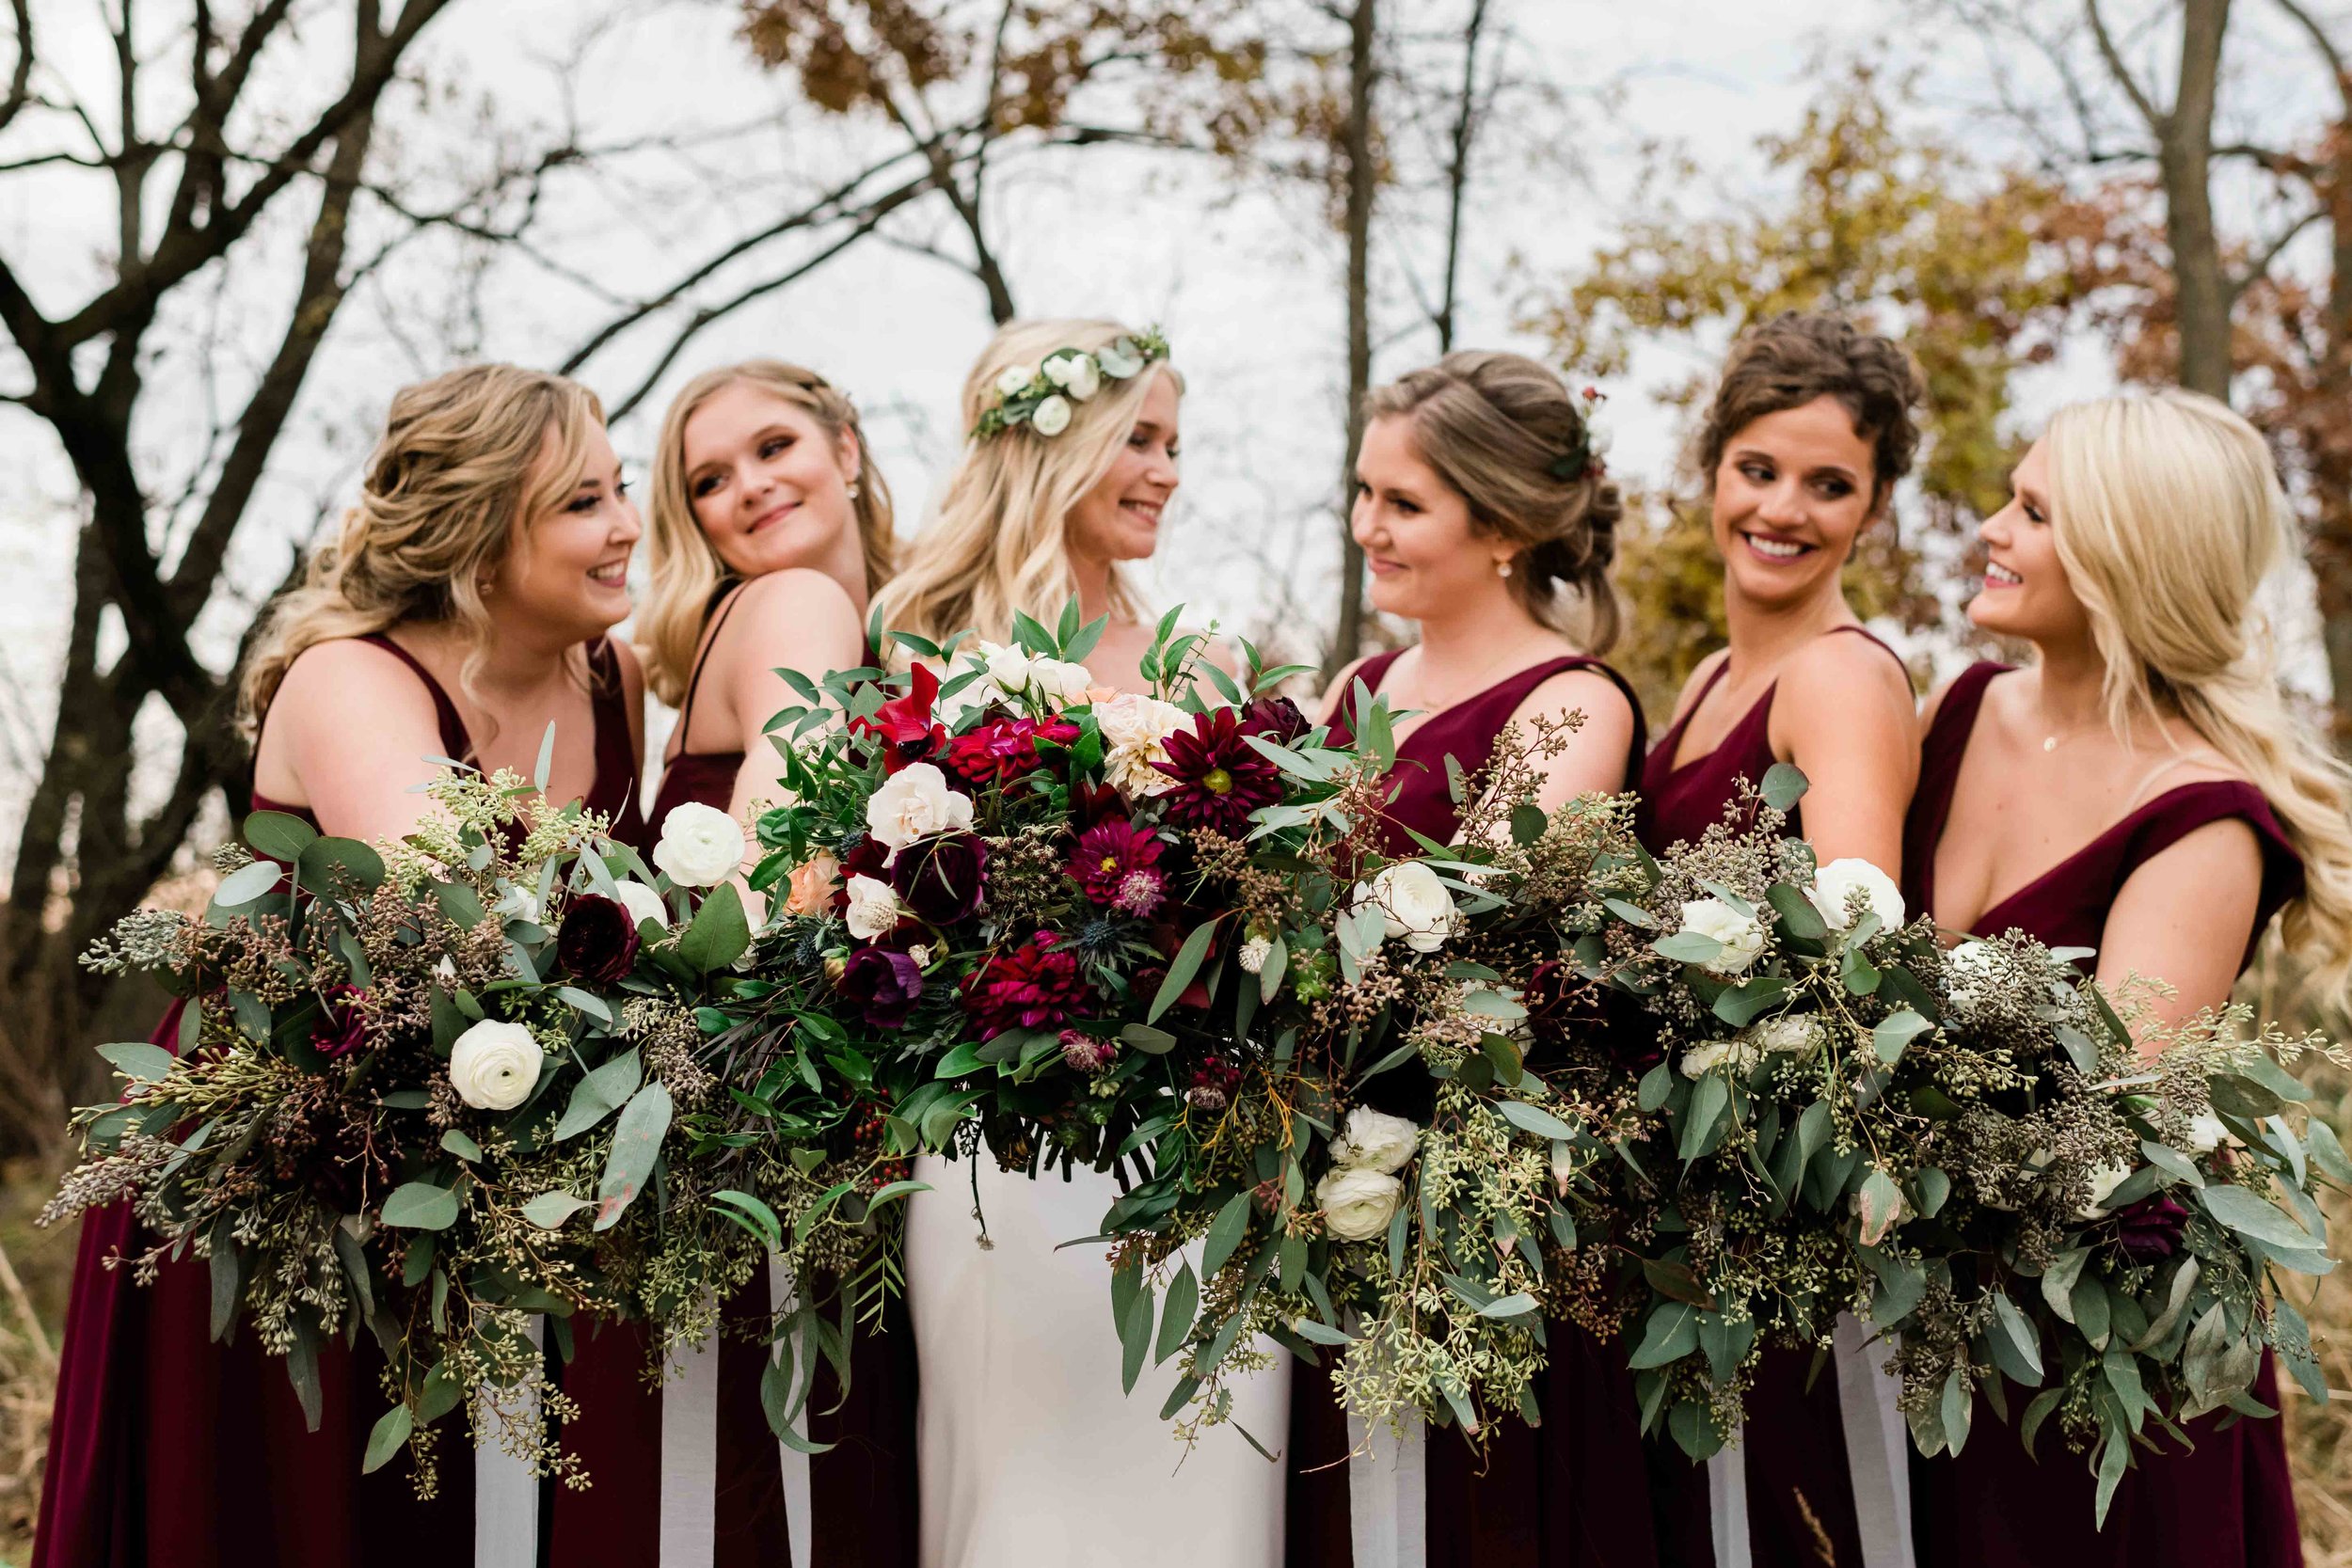 Bride and bridesmaids smile at each other as they hold out their bouquets